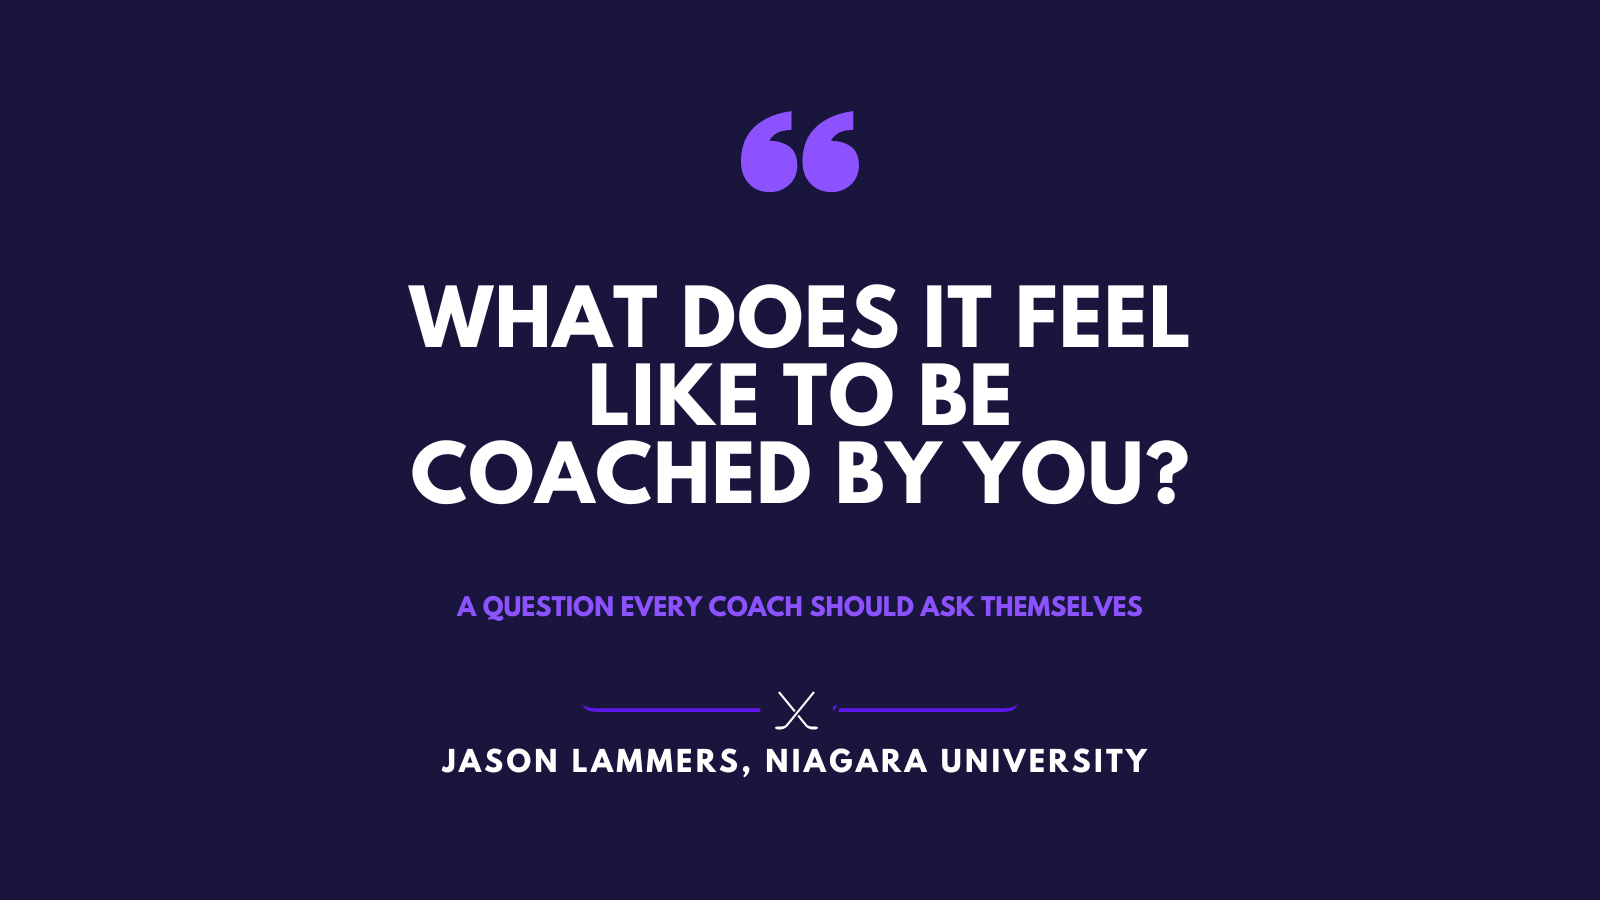 What does it feel like to be coached by you?